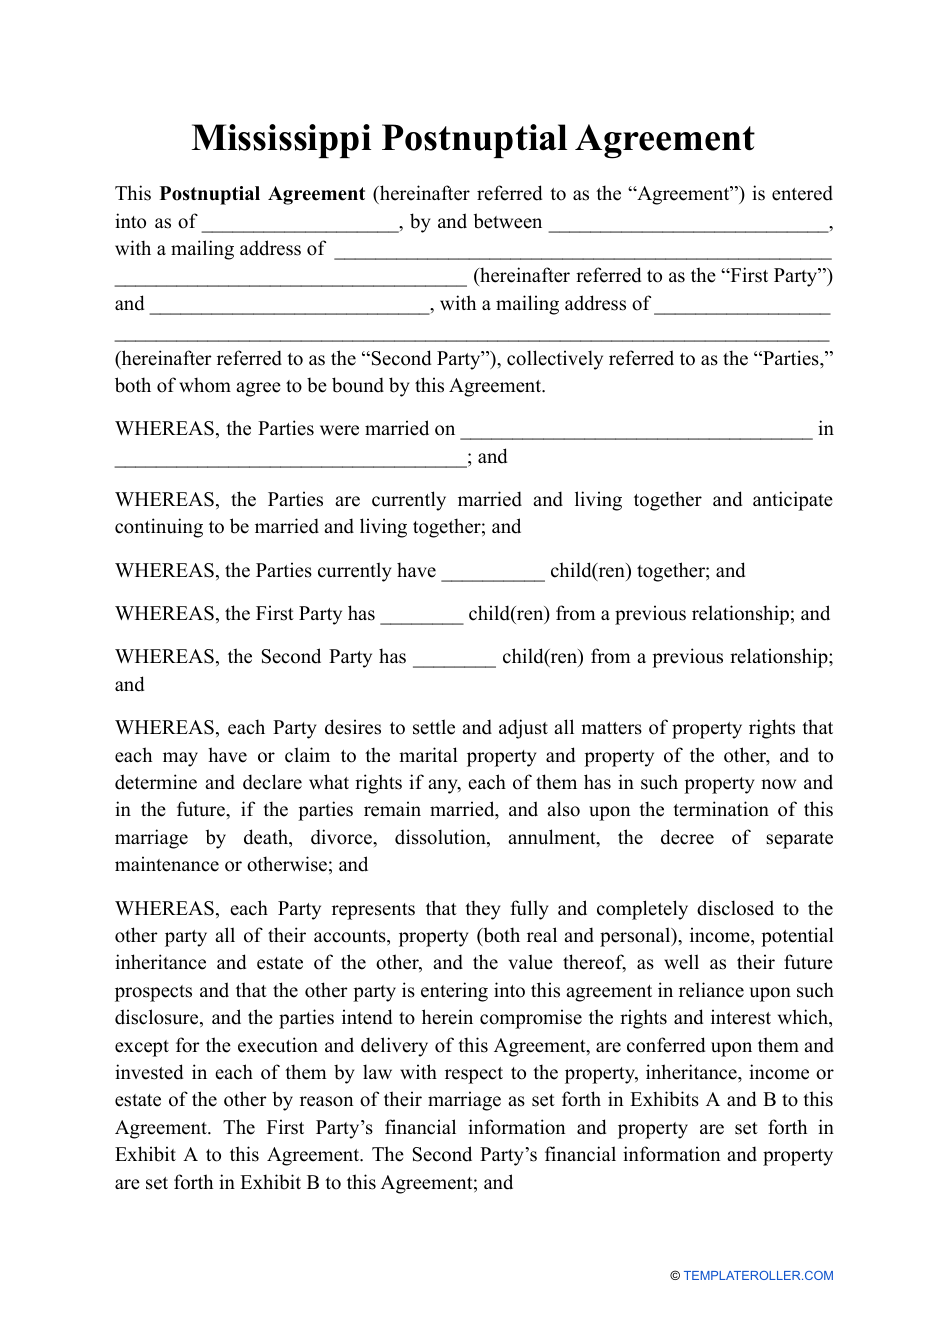 Postnuptial Agreement Template - Mississippi, Page 1